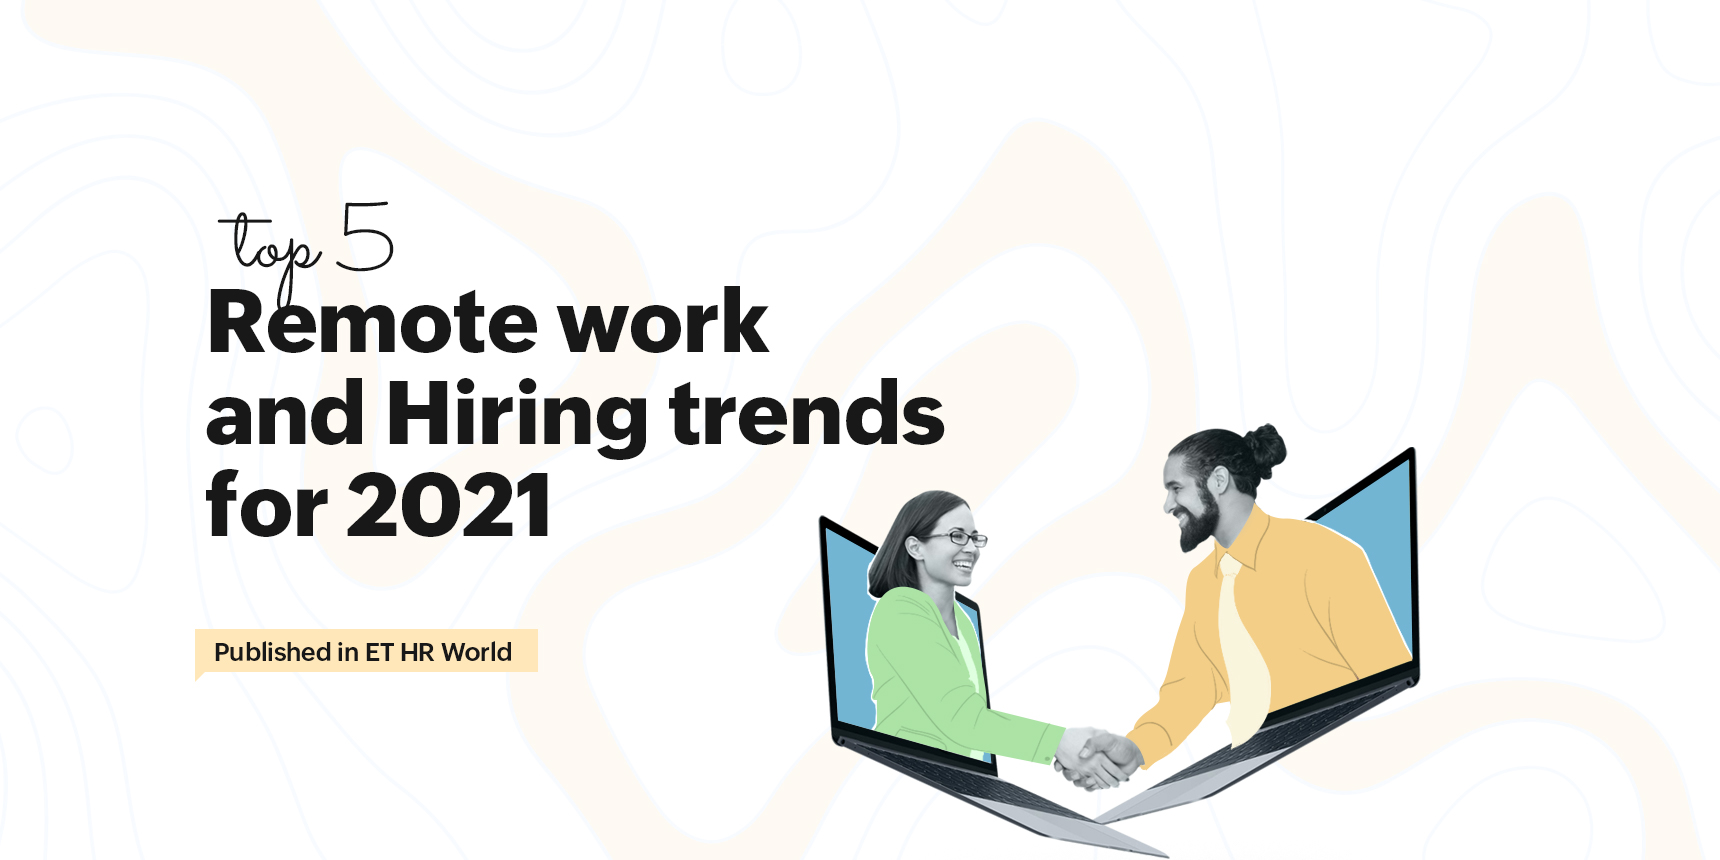 Remote work and hiring trends